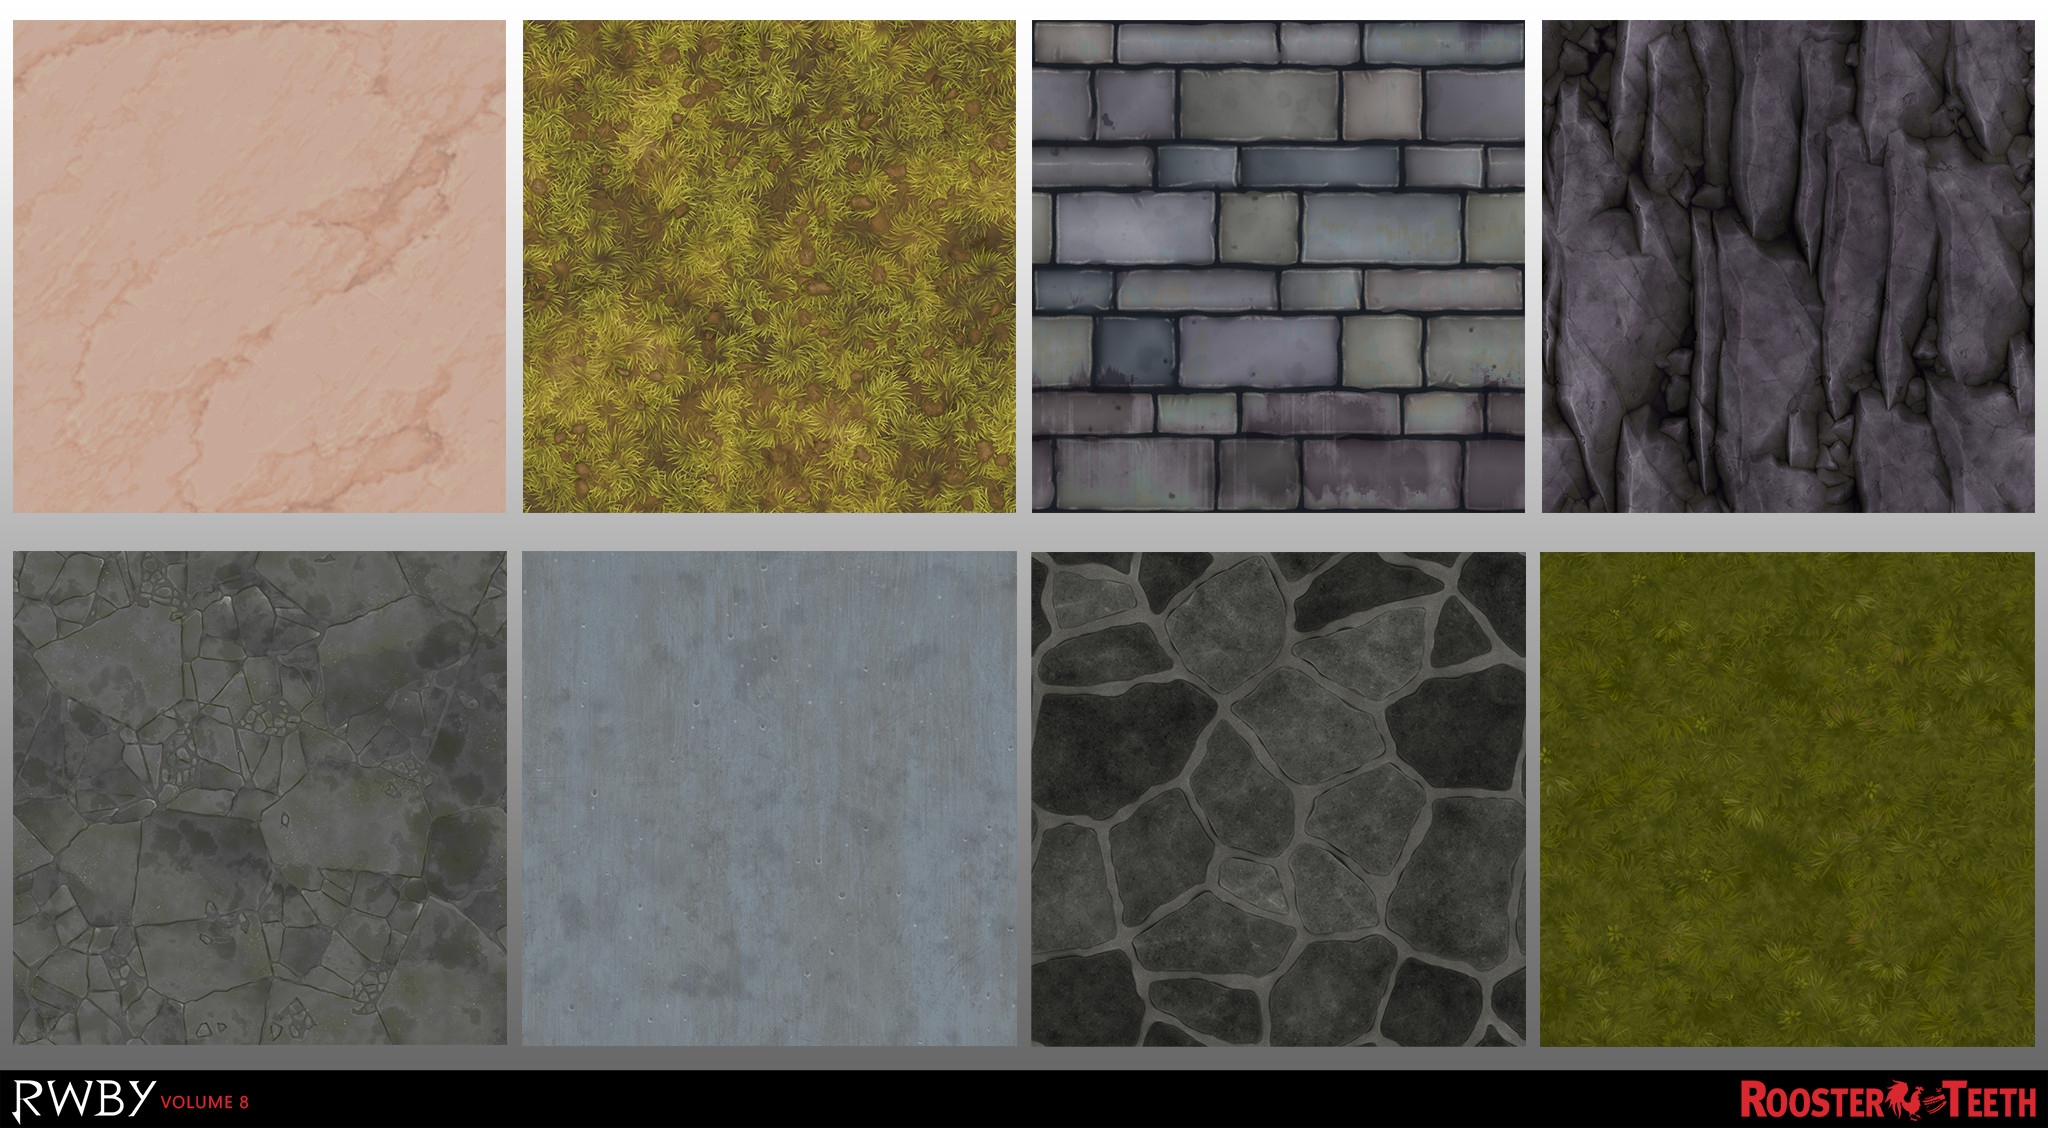 Tiling texture samples. Created in Substance Designer. The goal was a painterly, stylized look.